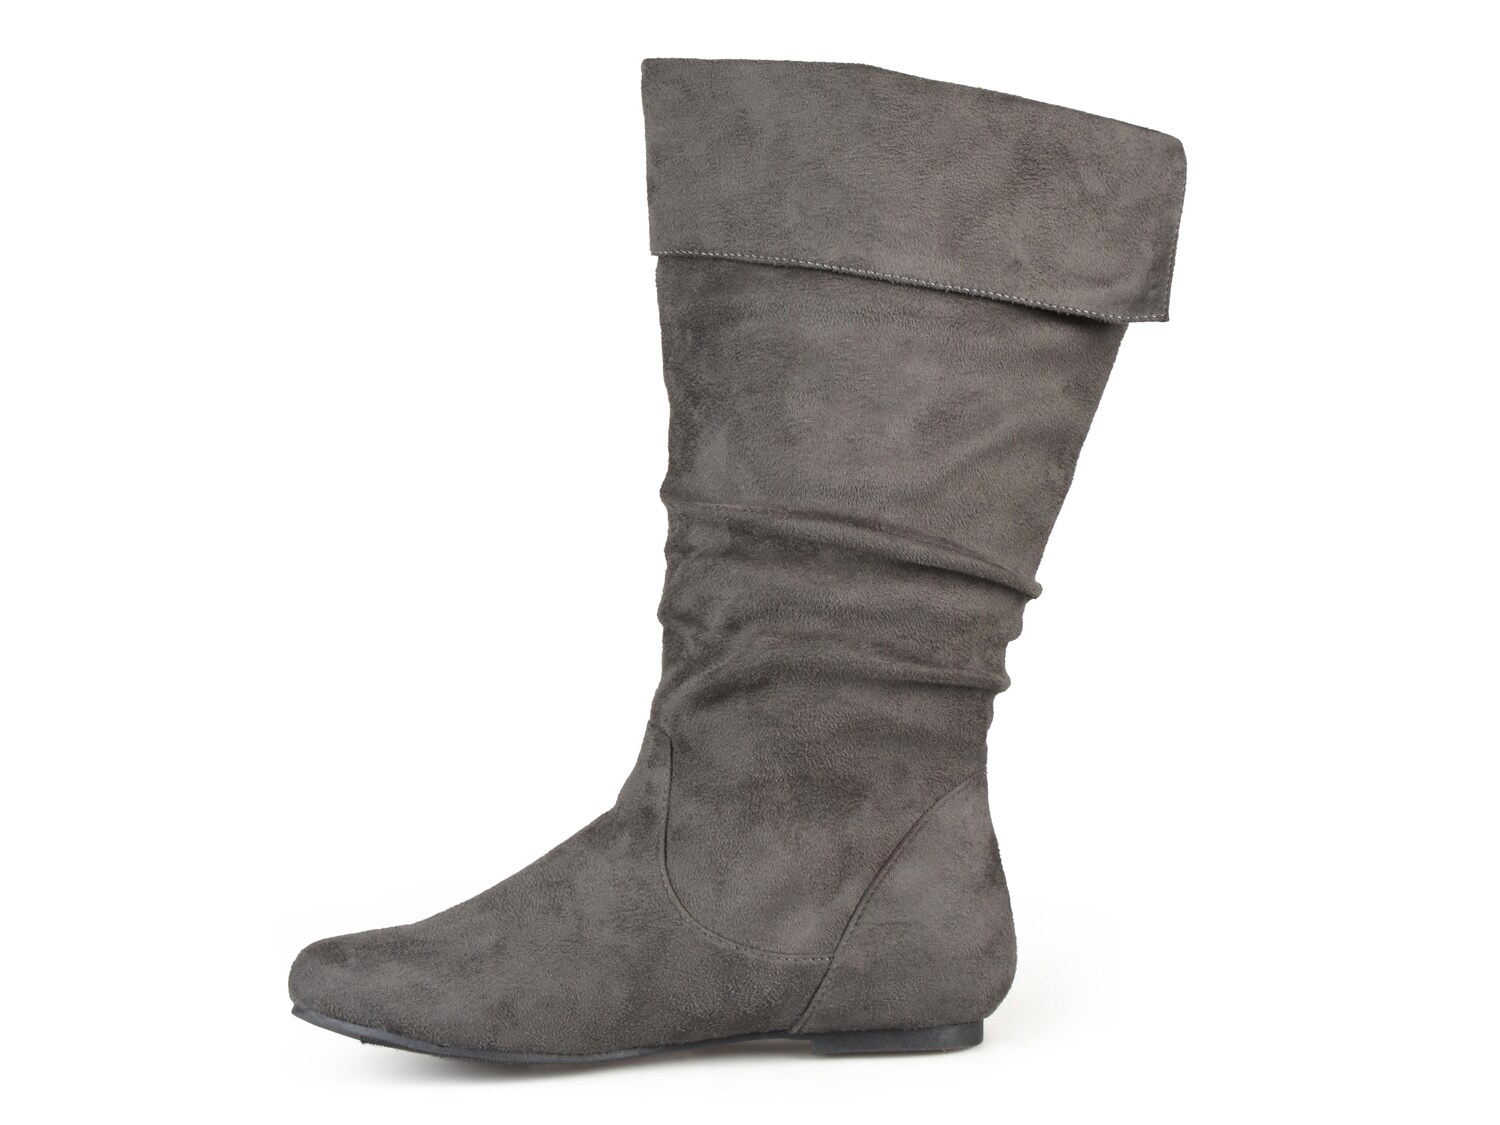 Journee Collection Shelley-3 Wide Calf Boot | DSW